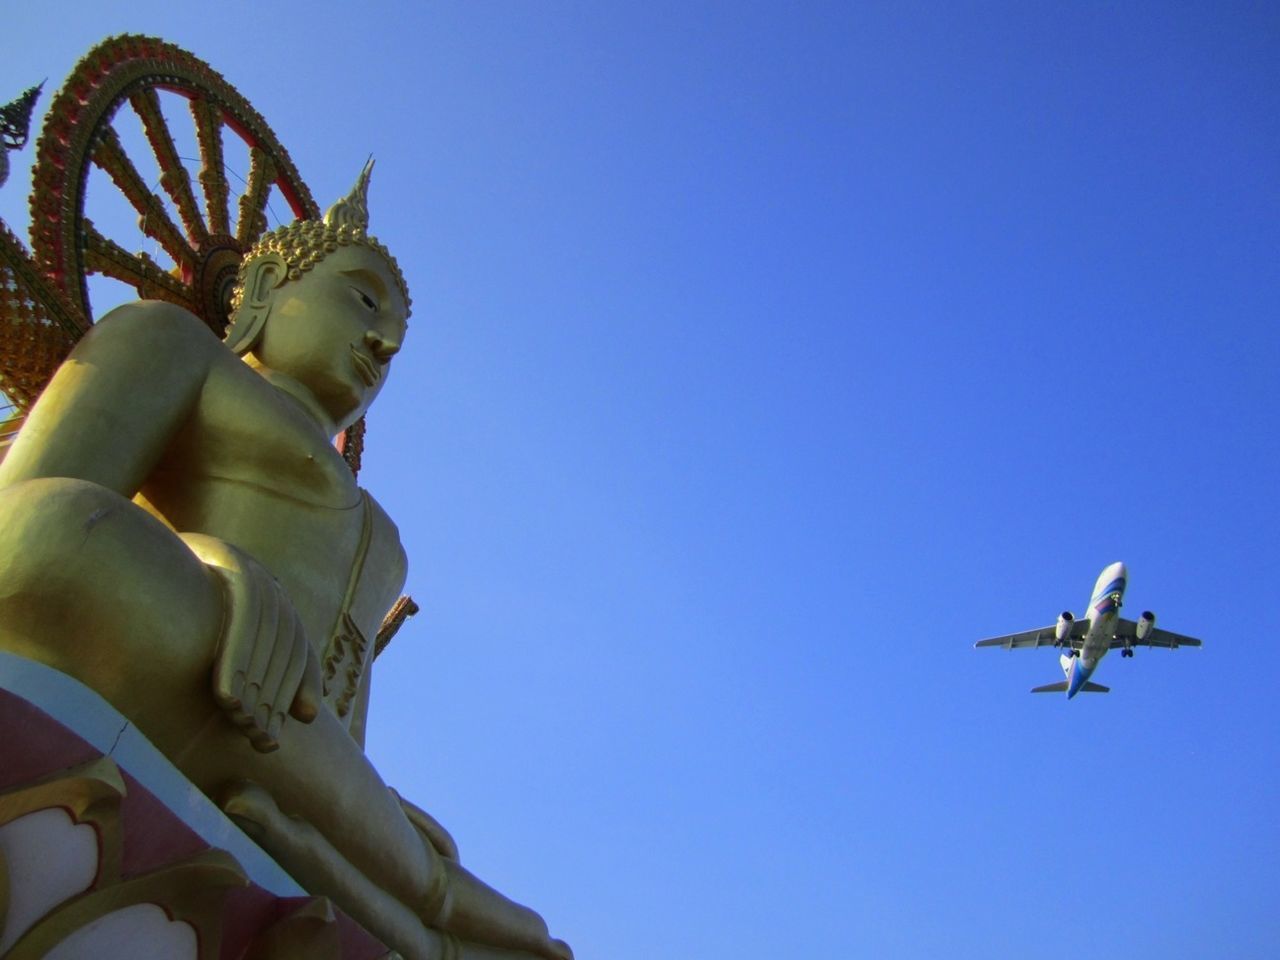 Low angle view of buddha statue against airplane in clear blue sky on sunny day